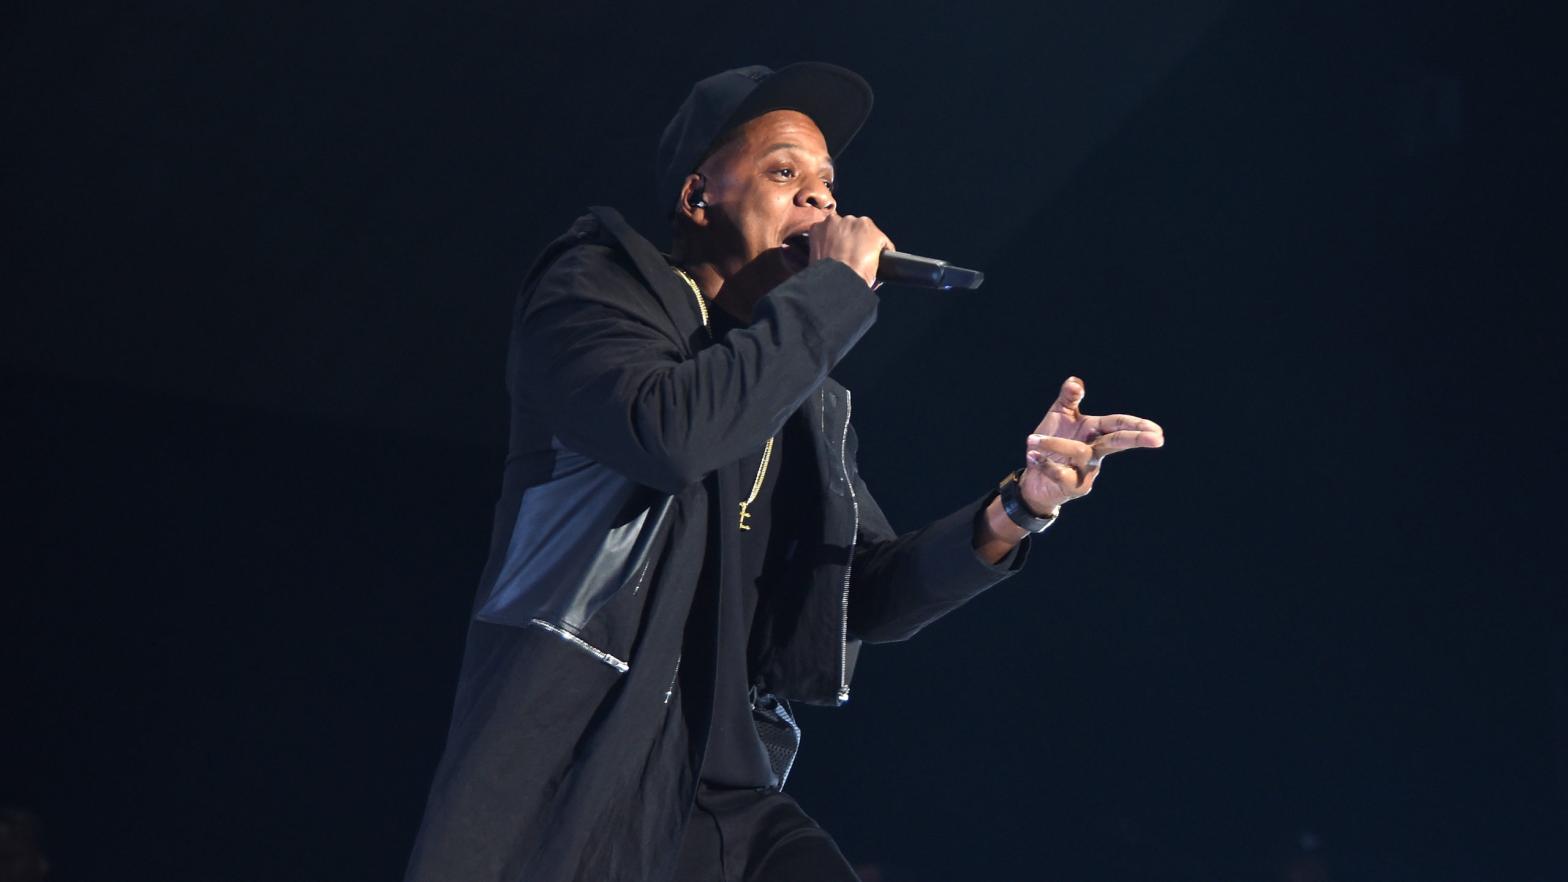 Jay-Z purchased the music streaming service Tidal in 2015. (Photo: Jamie McCarthy, Getty Images)